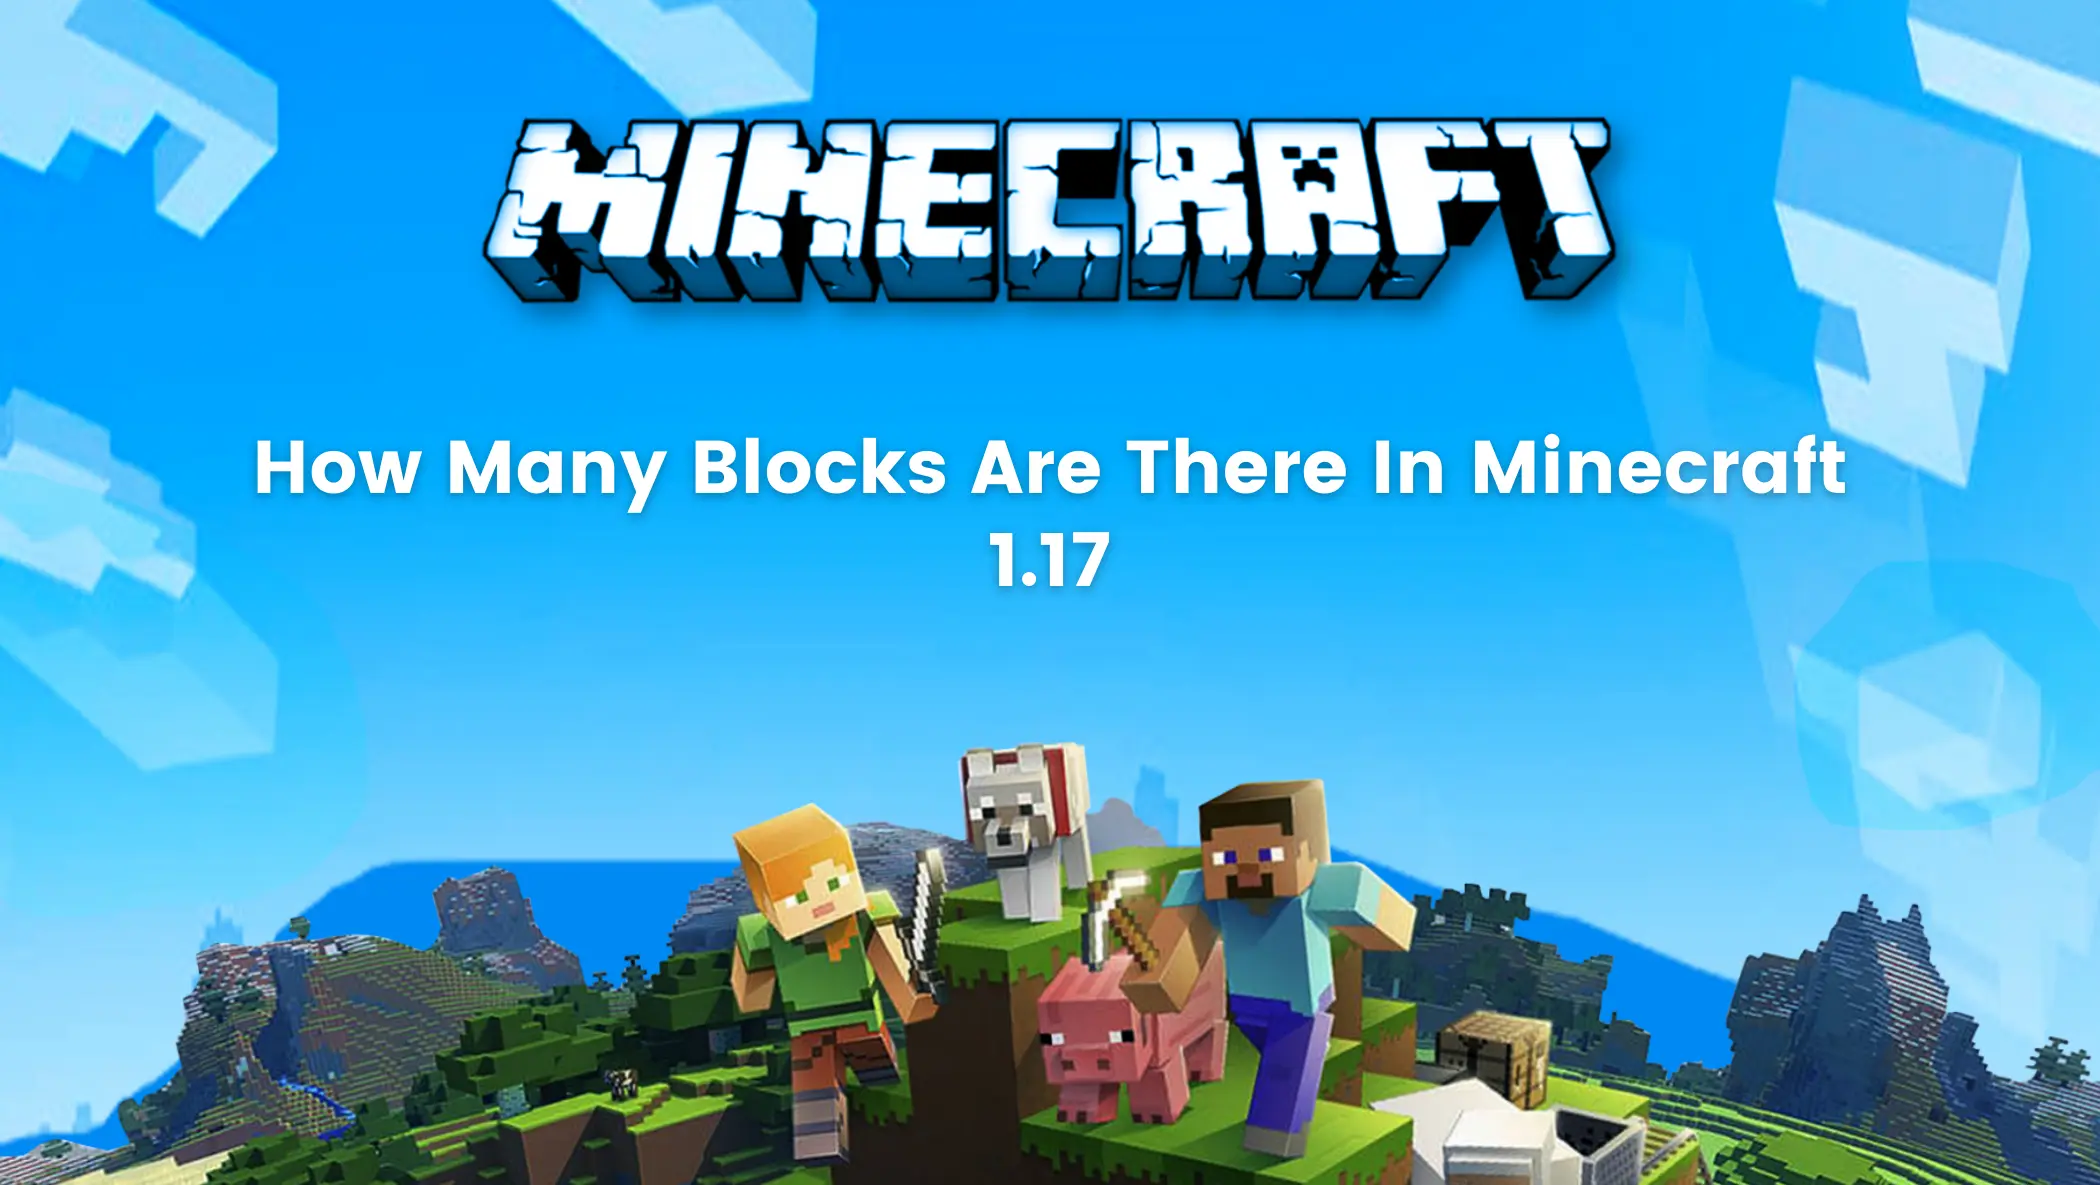 How Many Blocks Are There In Minecraft 1.17